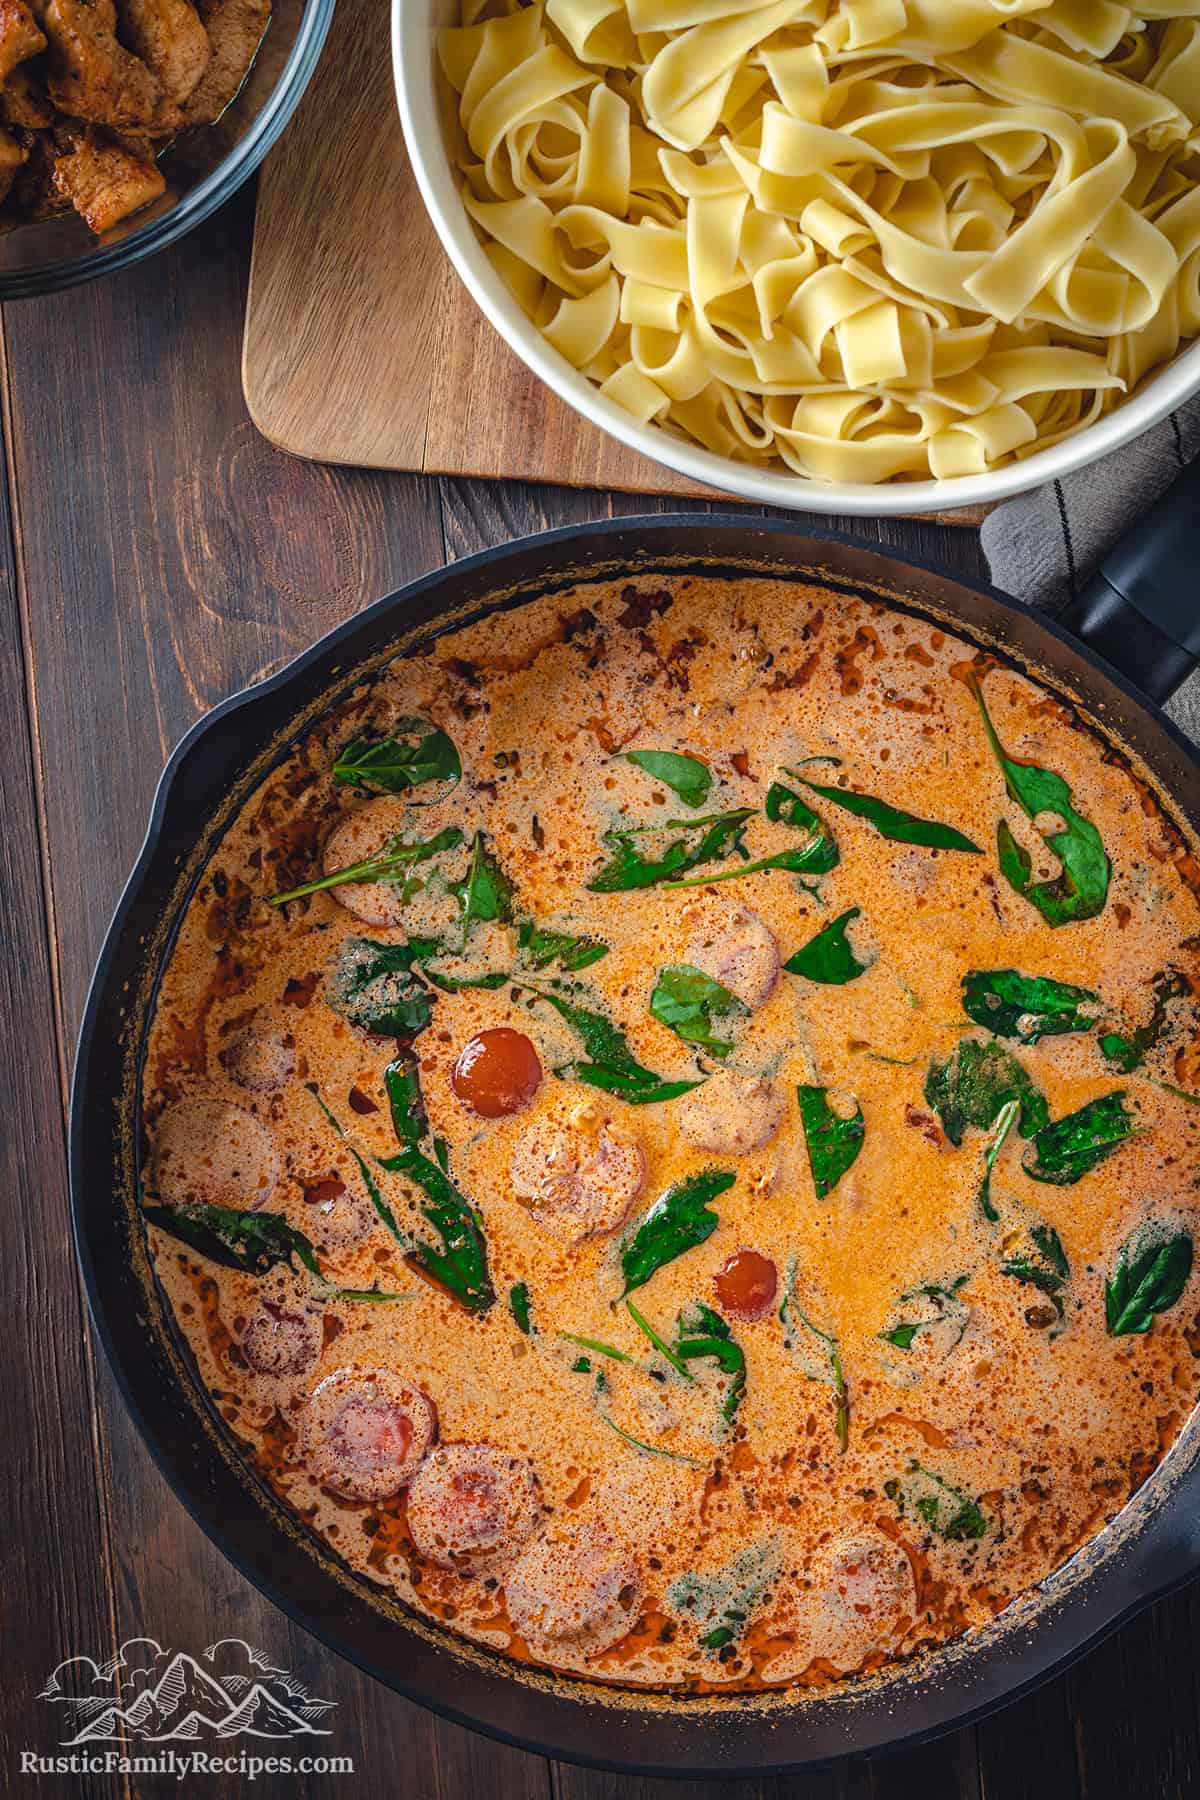 Skillet with sauce for tuscan chicken pasta